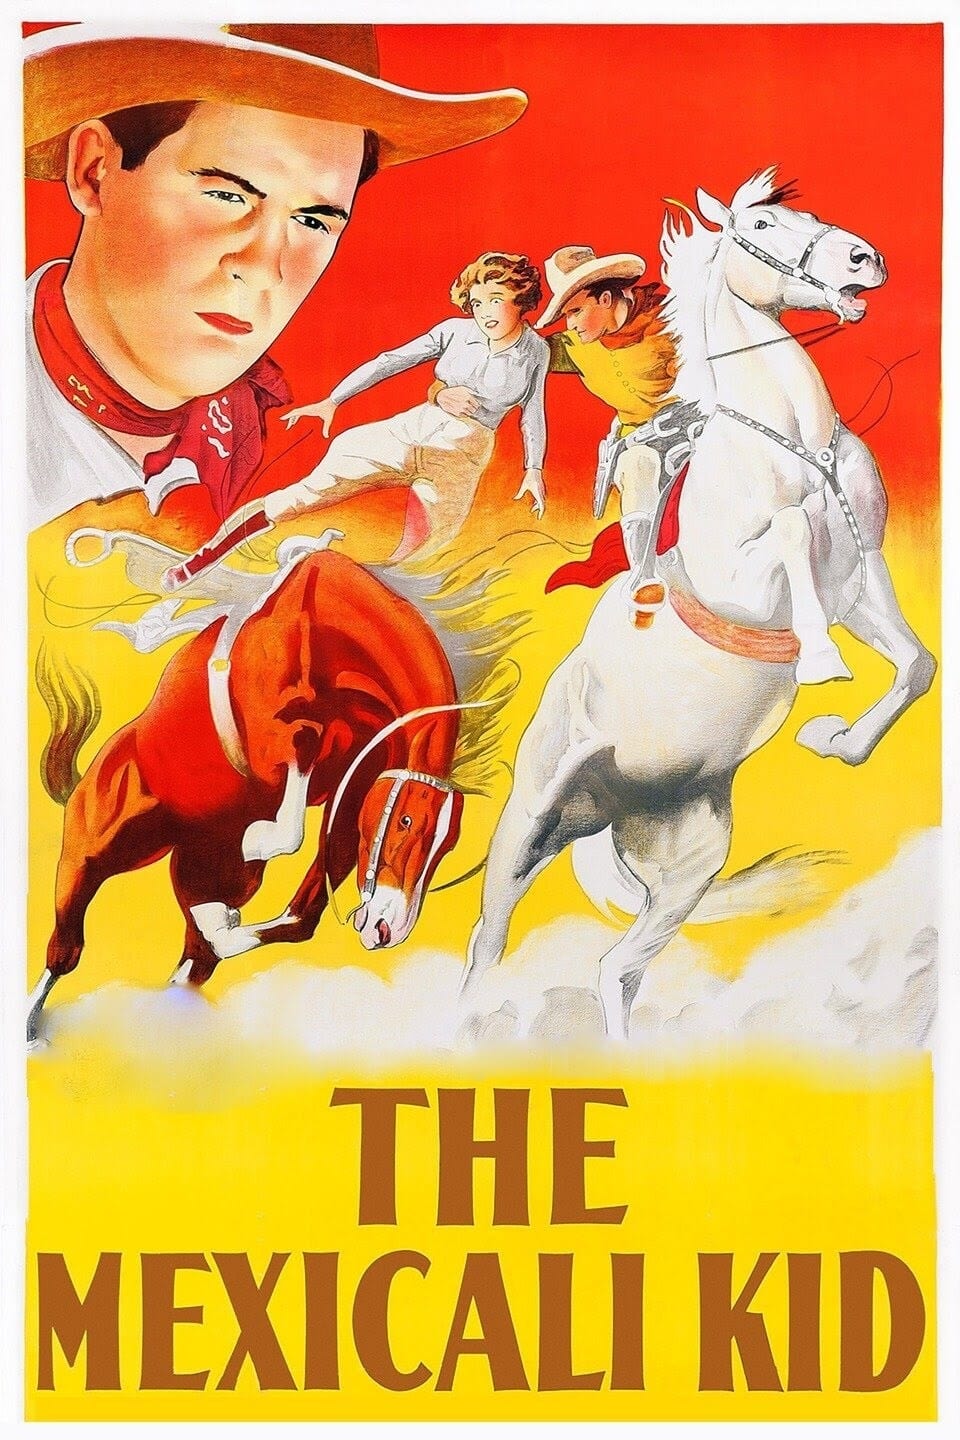 The Mexicali Kid (1938)